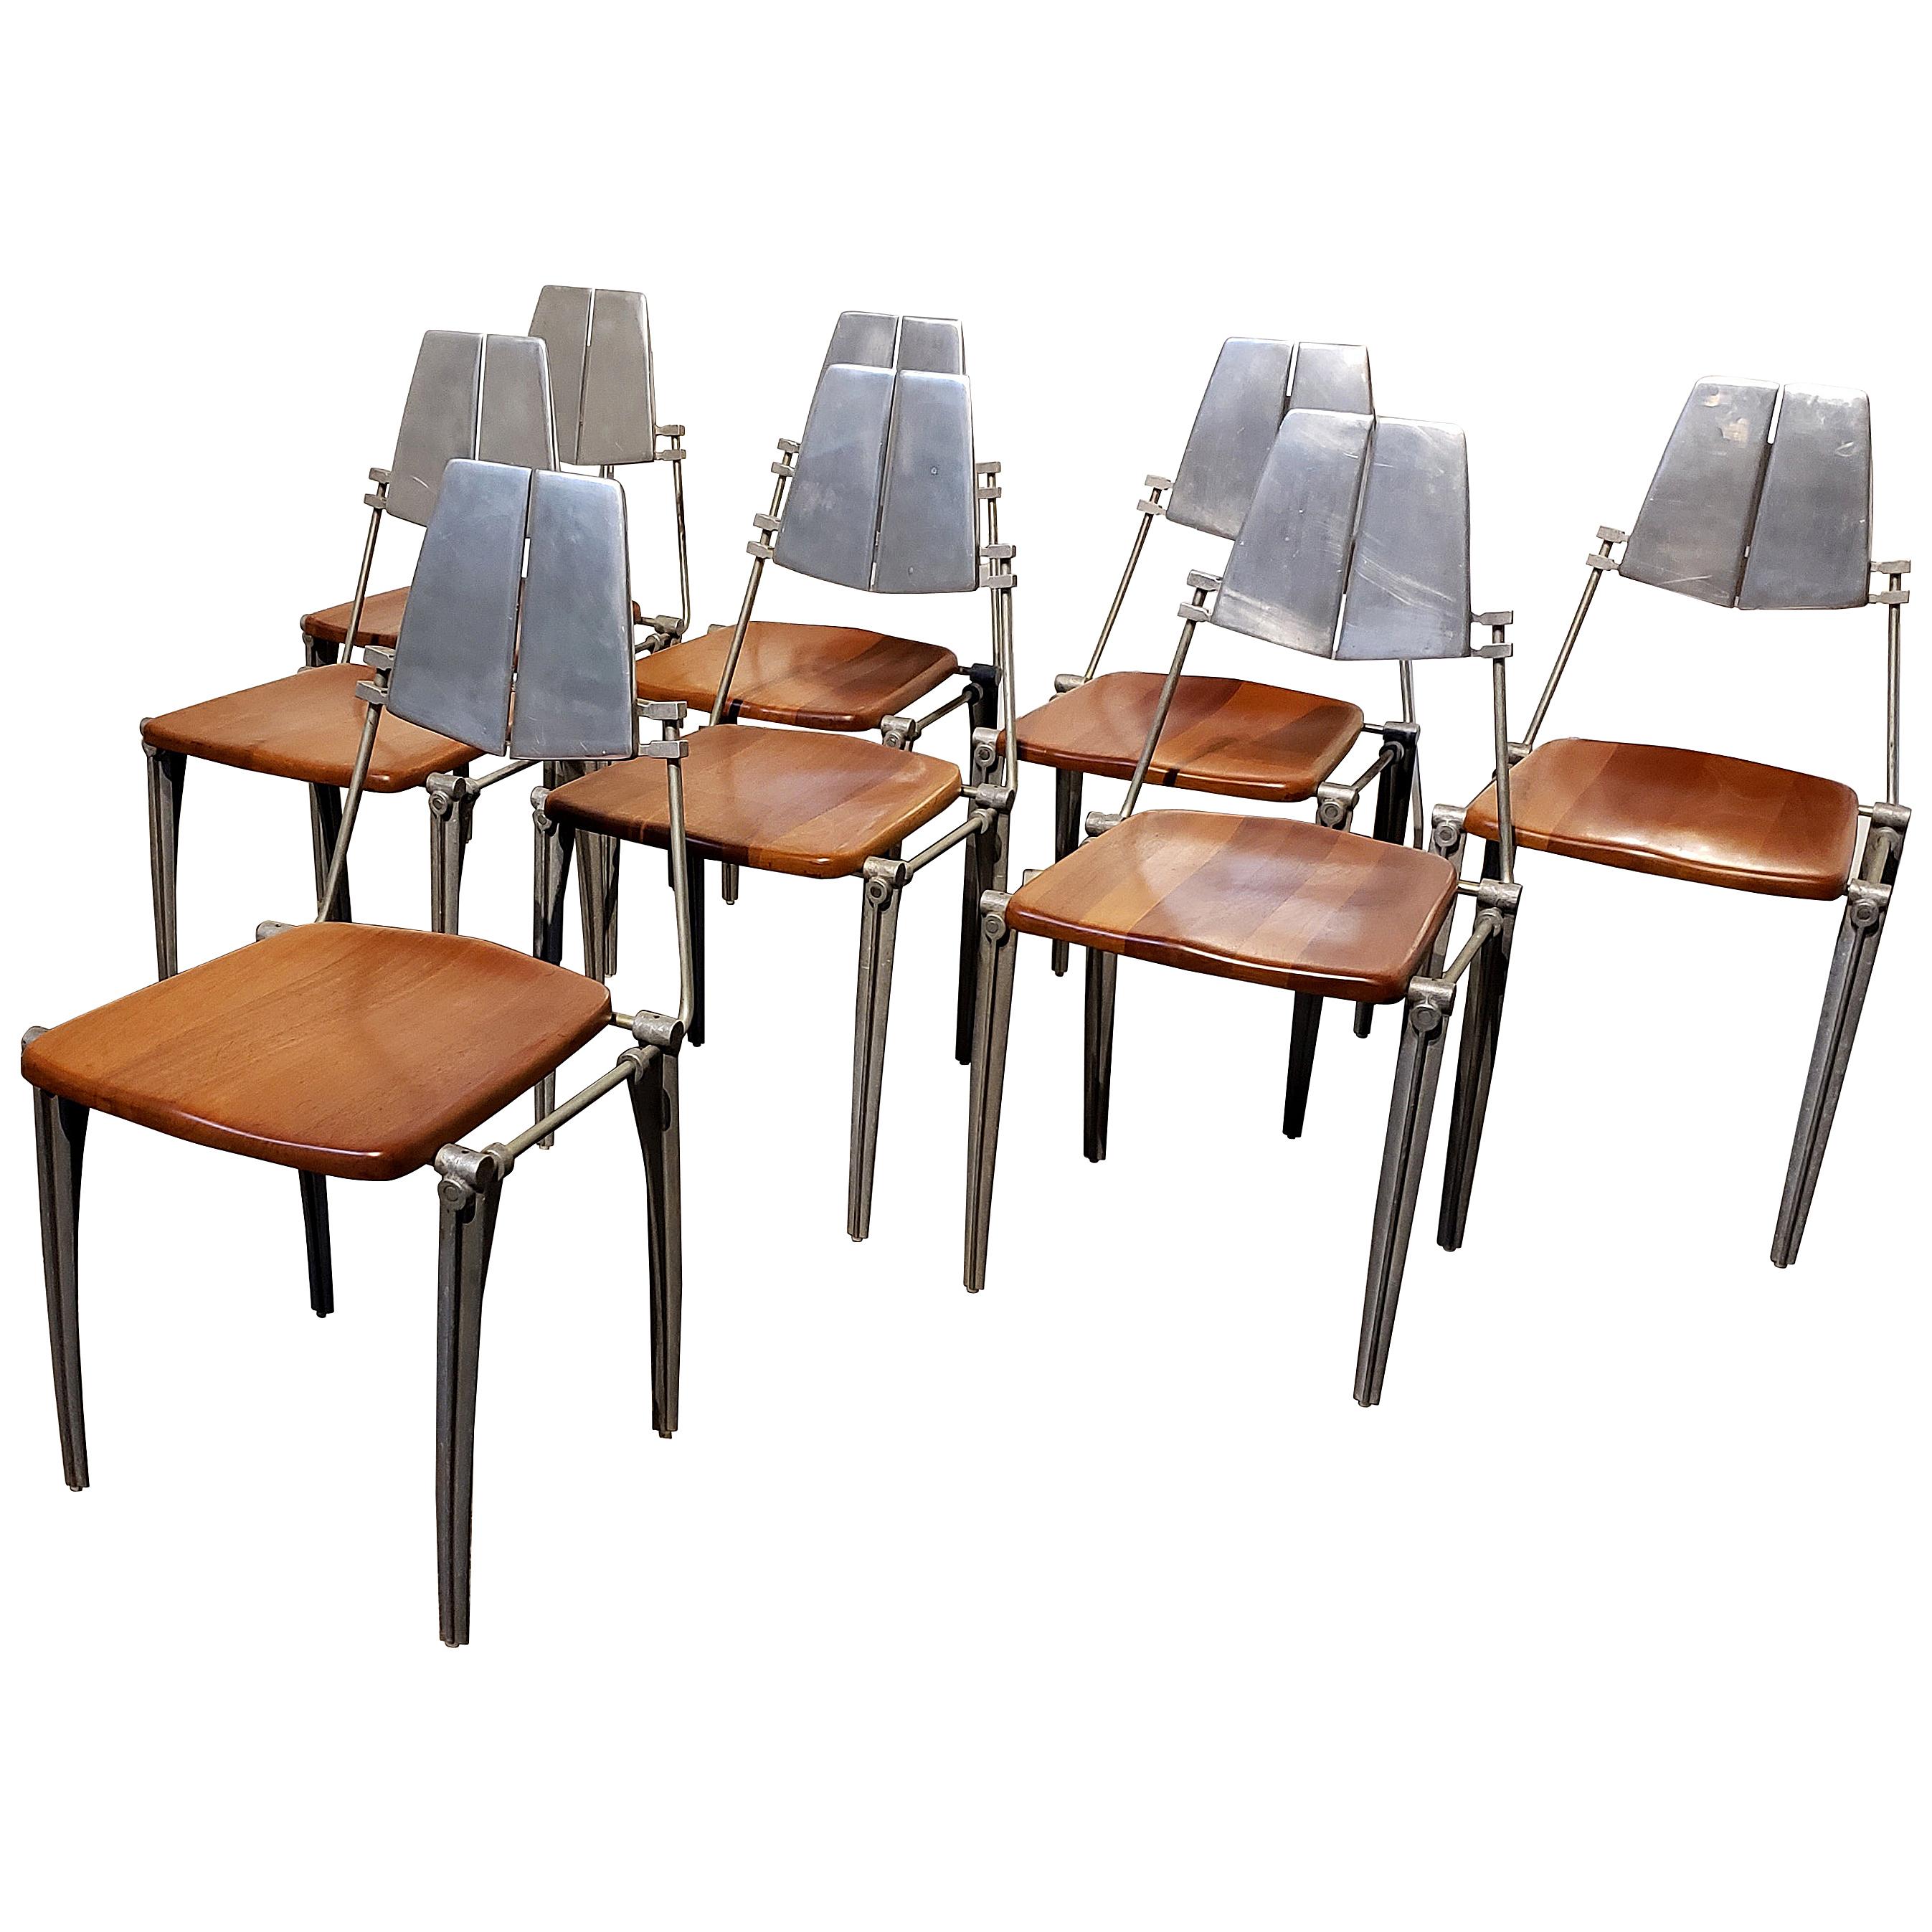 Robert Josten Aluminum and Maple Modern Industrial Dining Chairs Set of 8 For Sale